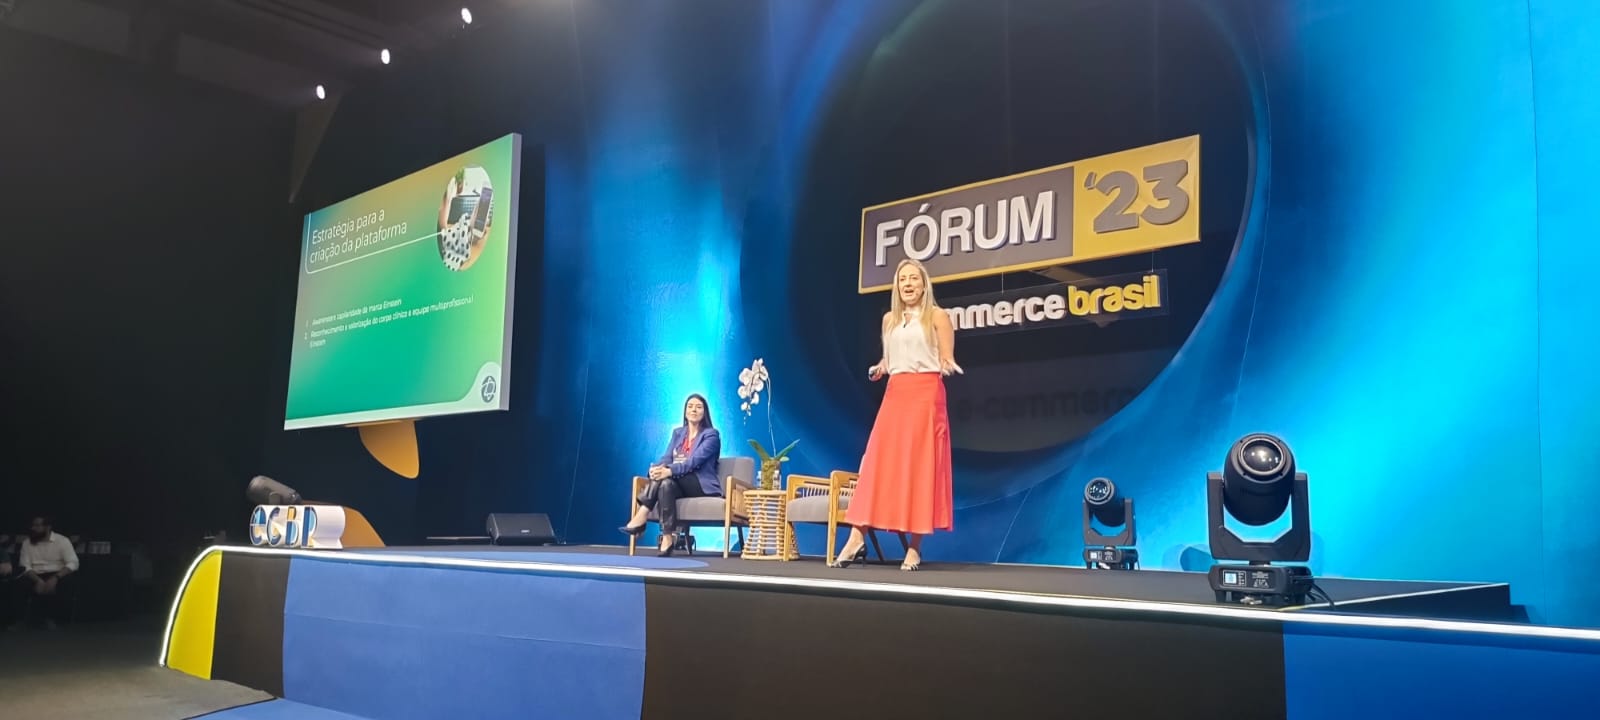 Image of two speakers on stage at the event